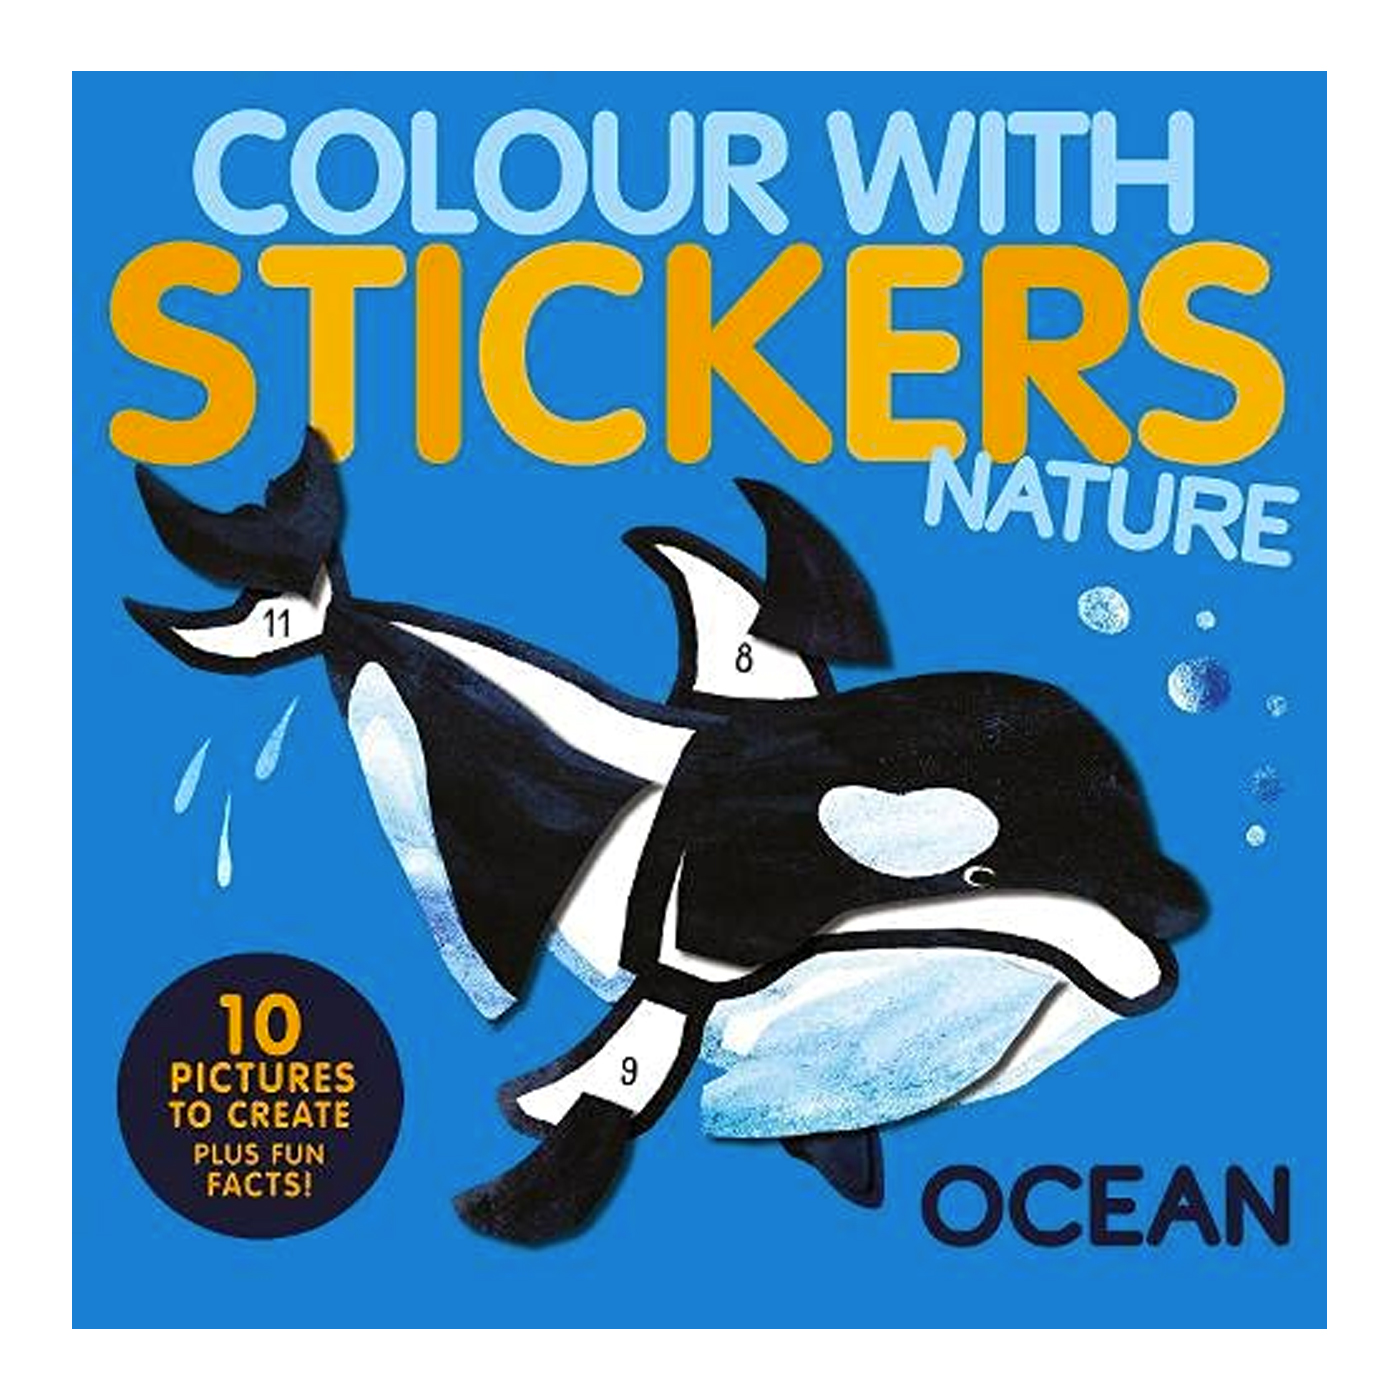  Colour with Stickers: Ocean